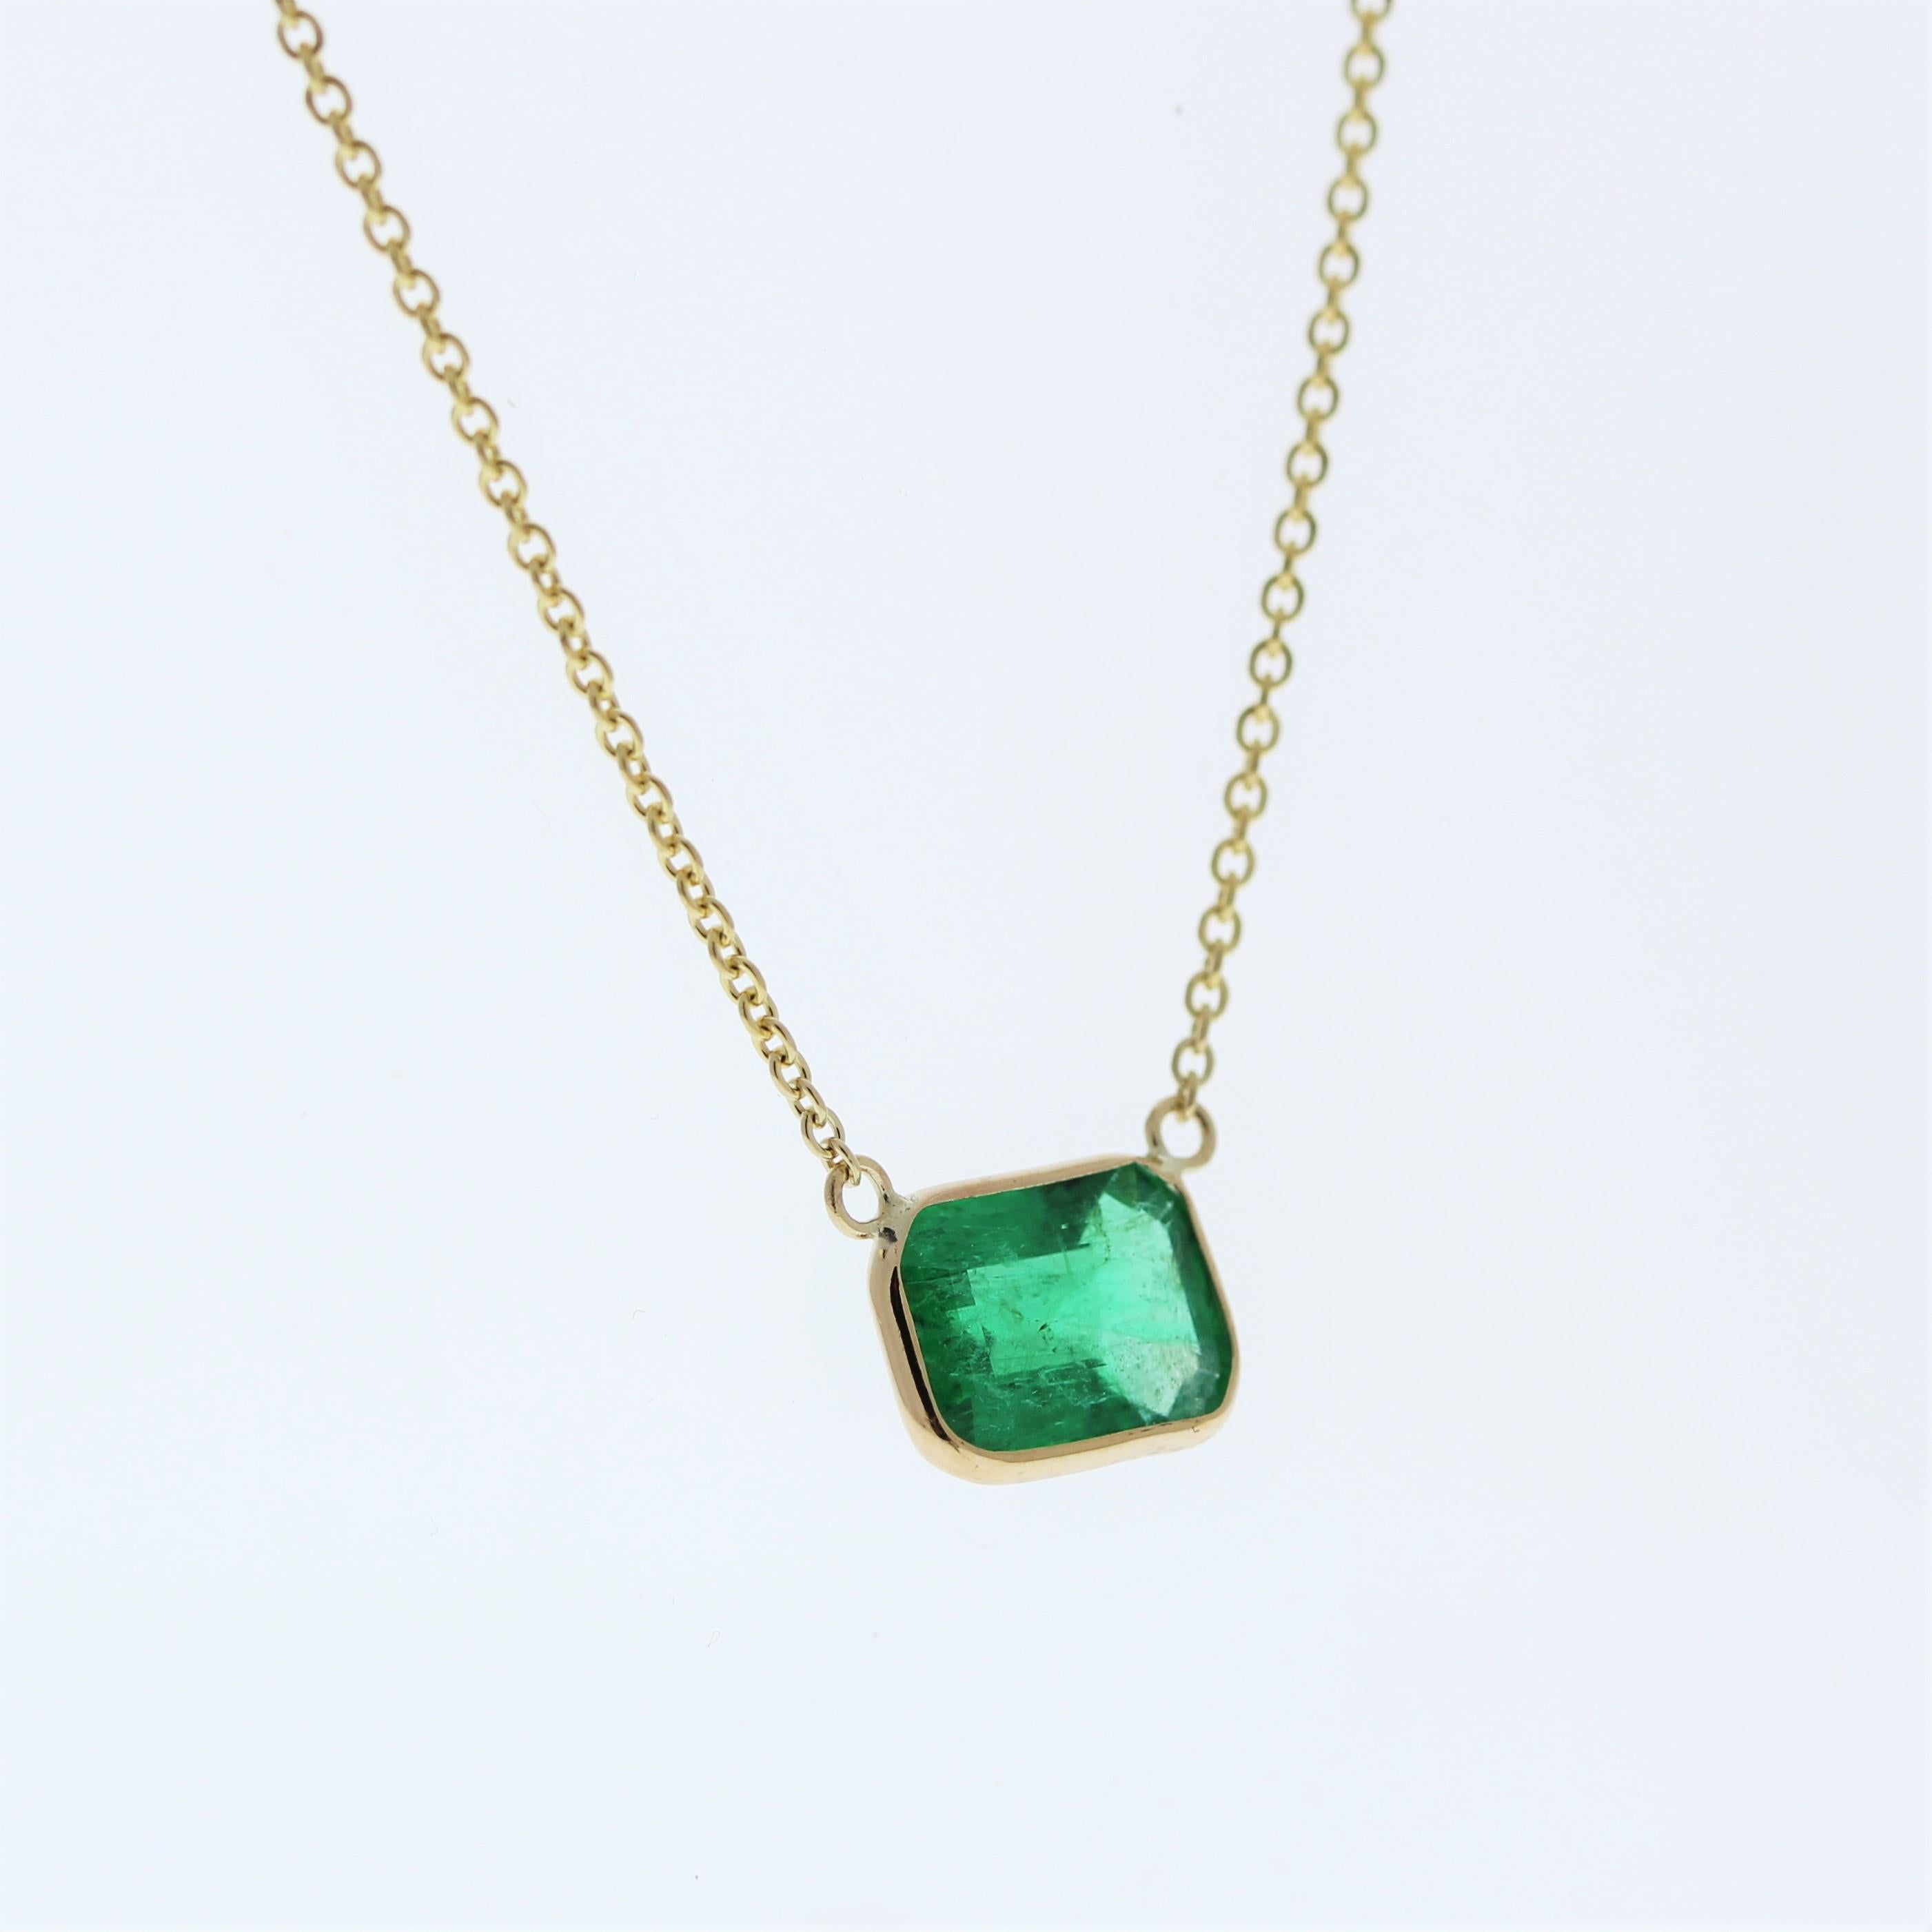 The necklace features a 1.80-carat emerald-cut emerald set in a 14 karat yellow gold pendant or setting. The emerald cut and the lush green color of the emerald against the yellow gold setting are likely to create an elegant and eye-catching fashion